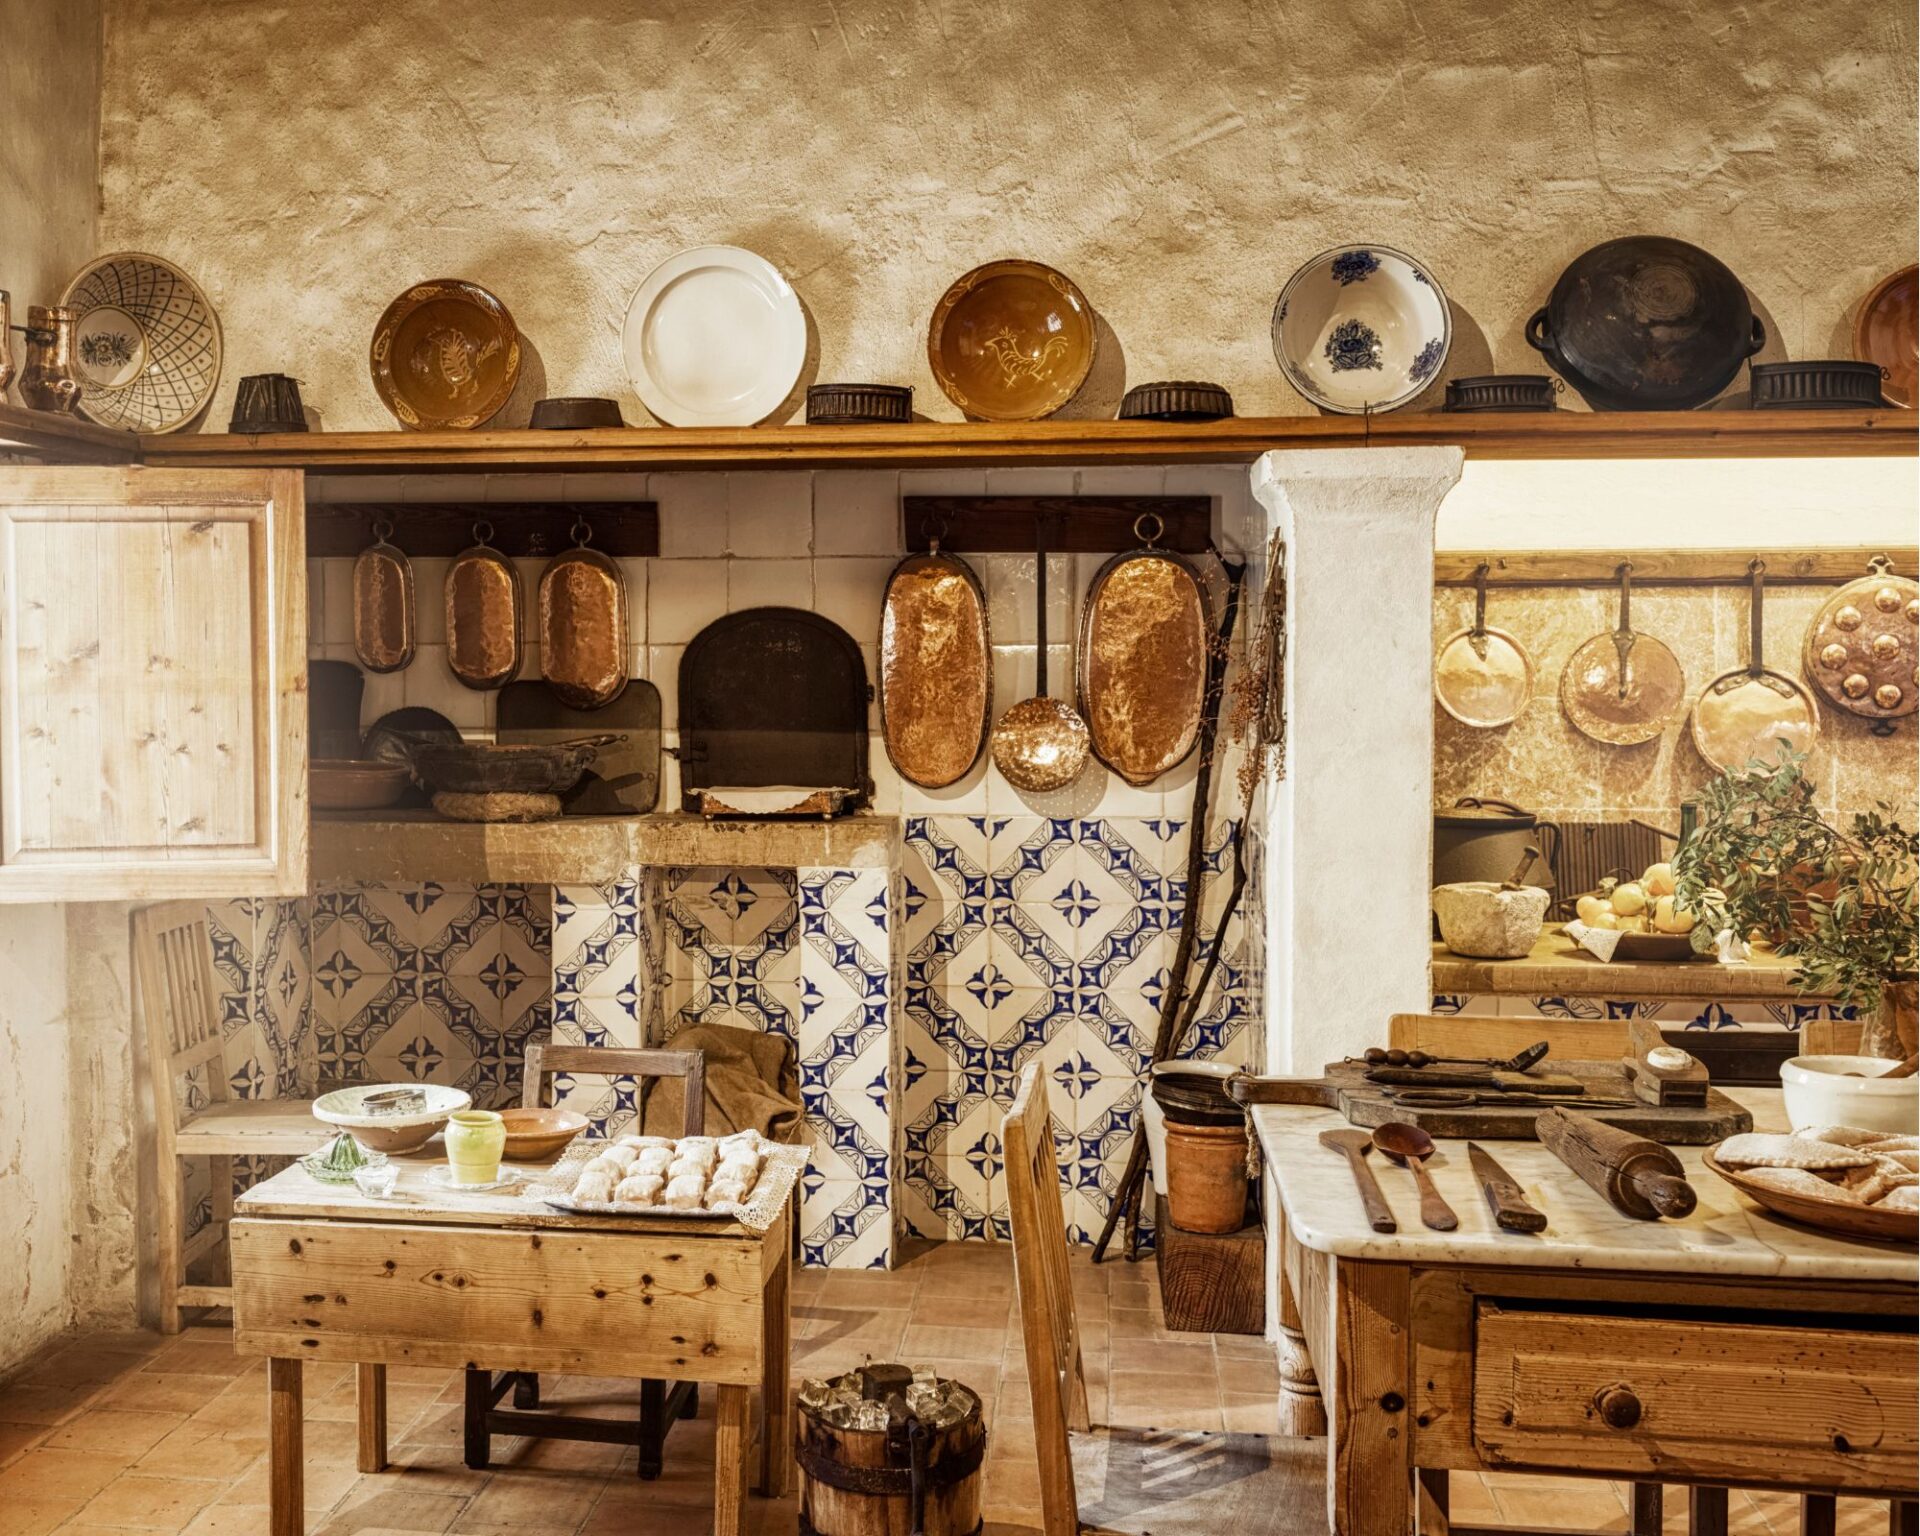 The kitchen of a witch